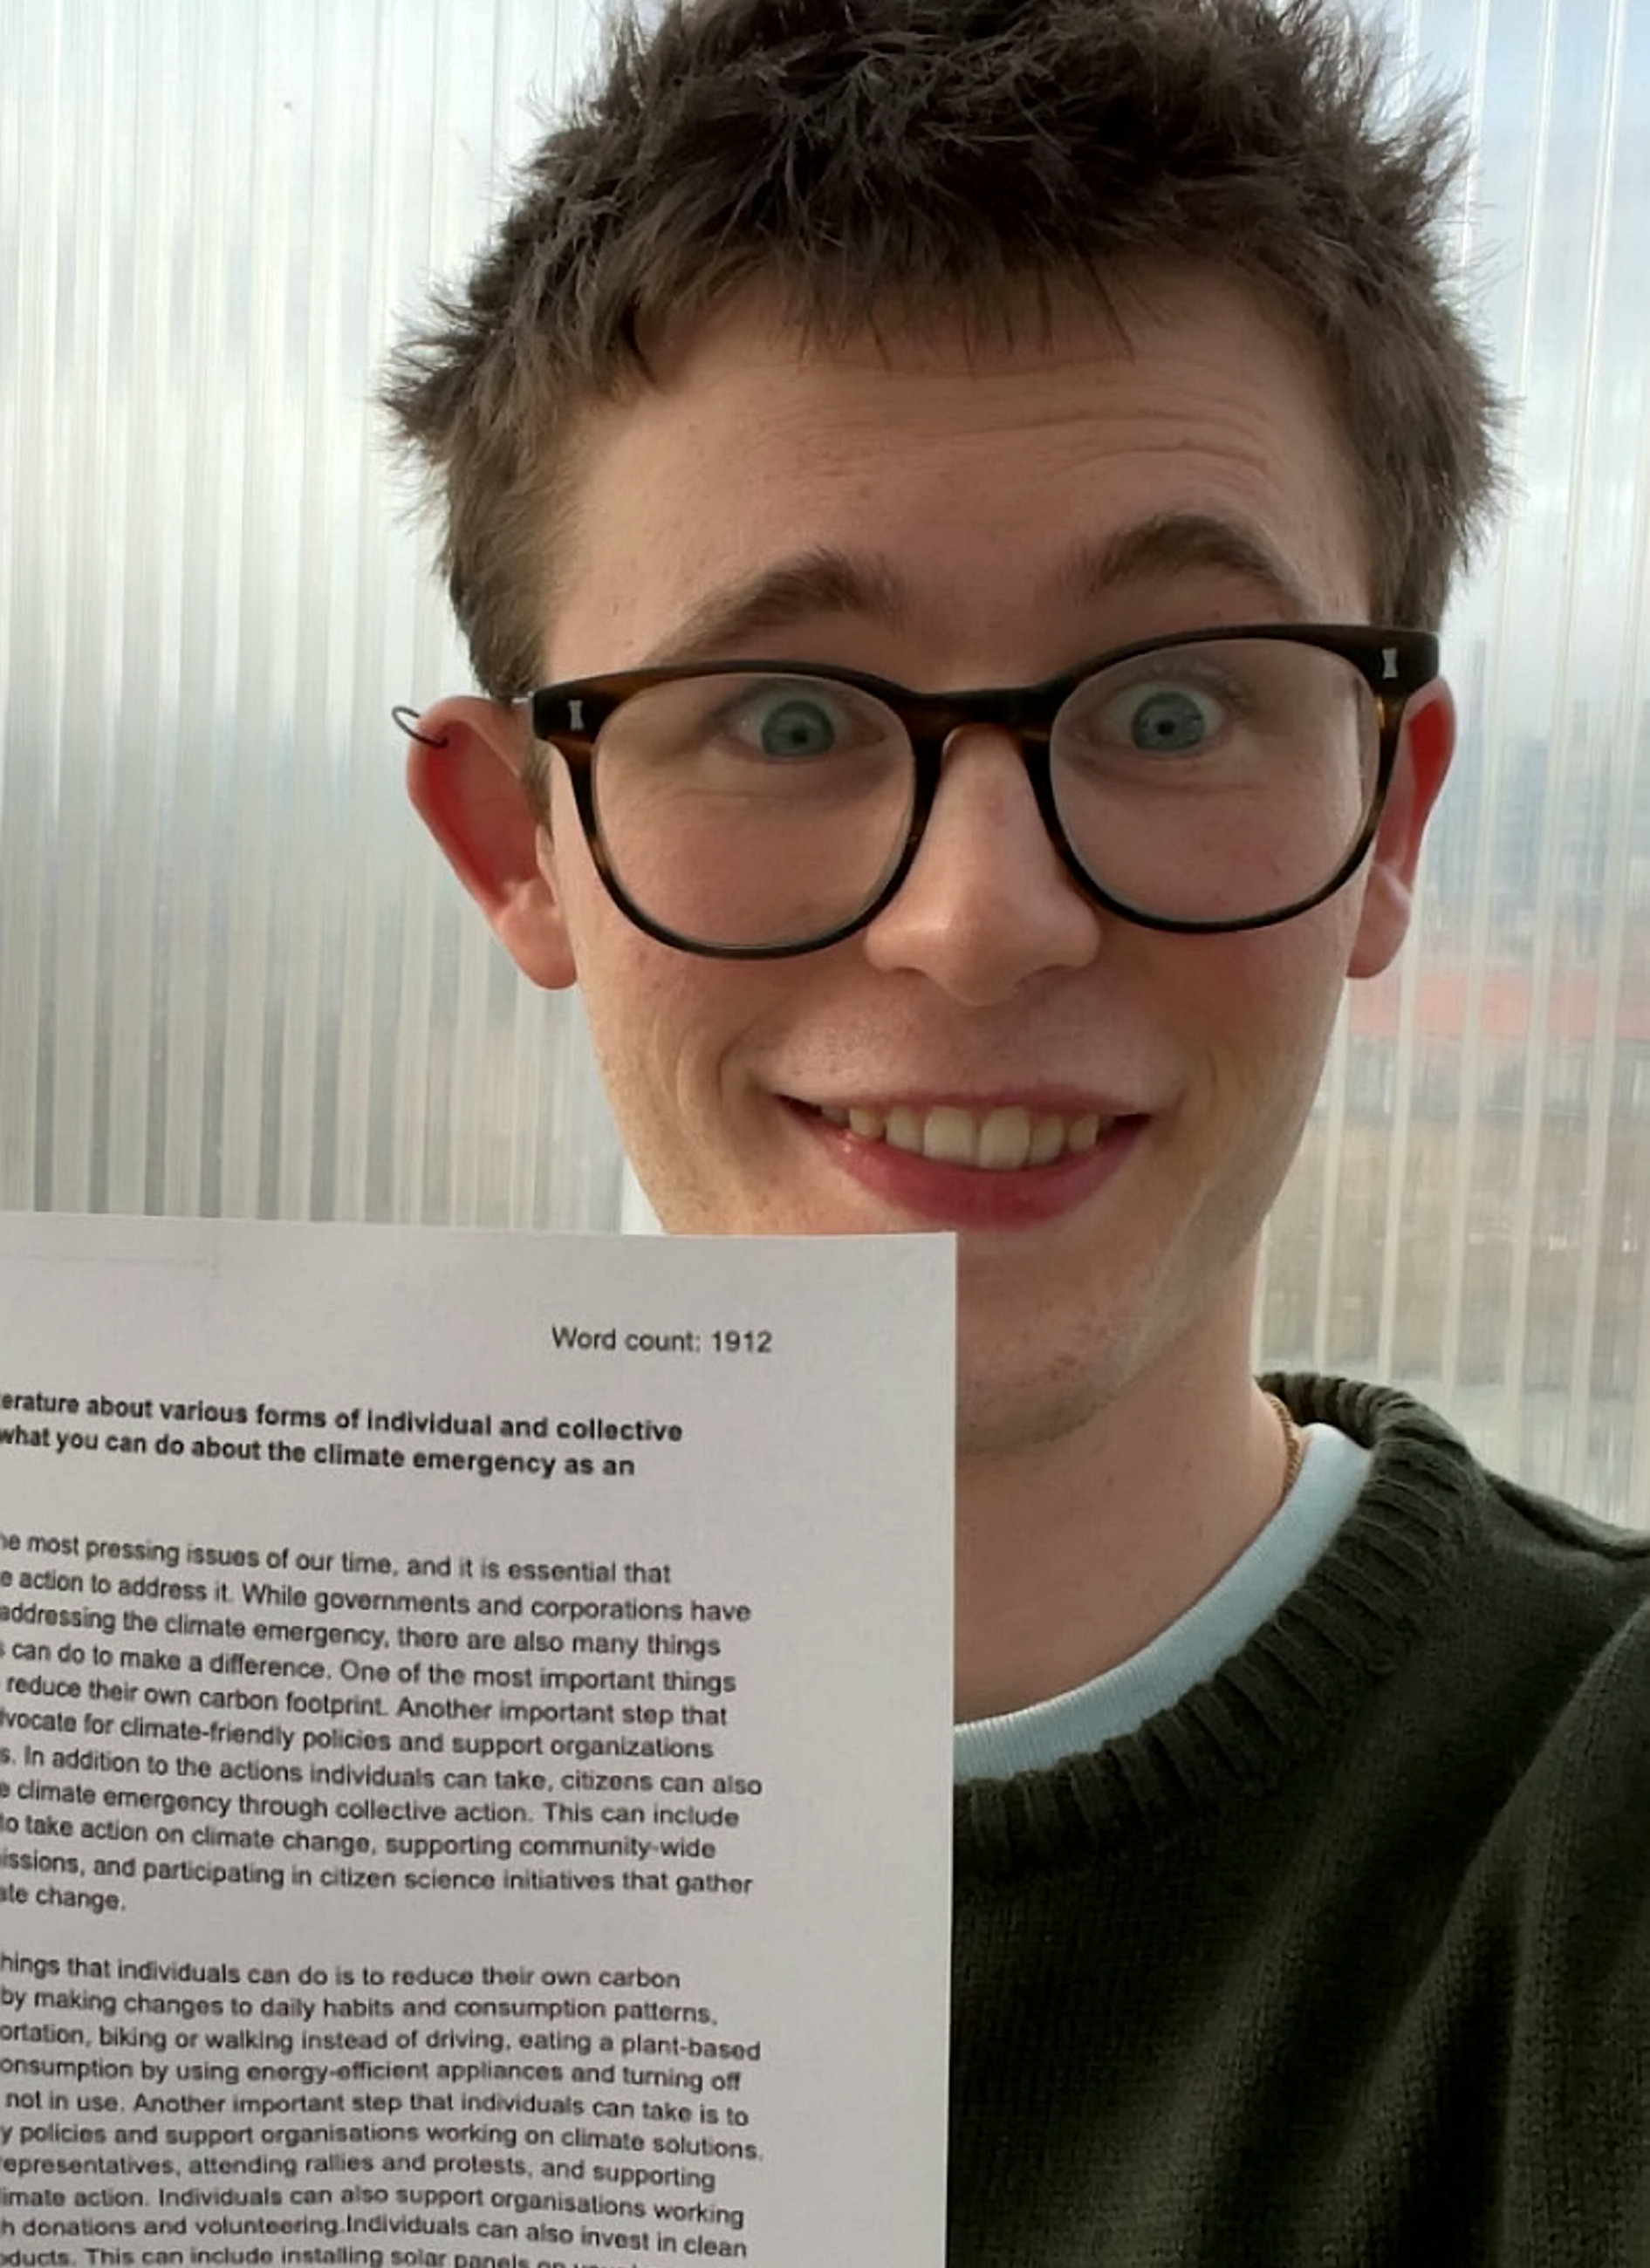 Student Successfully Passes 2,000-word University Essay By Using ChatGPT